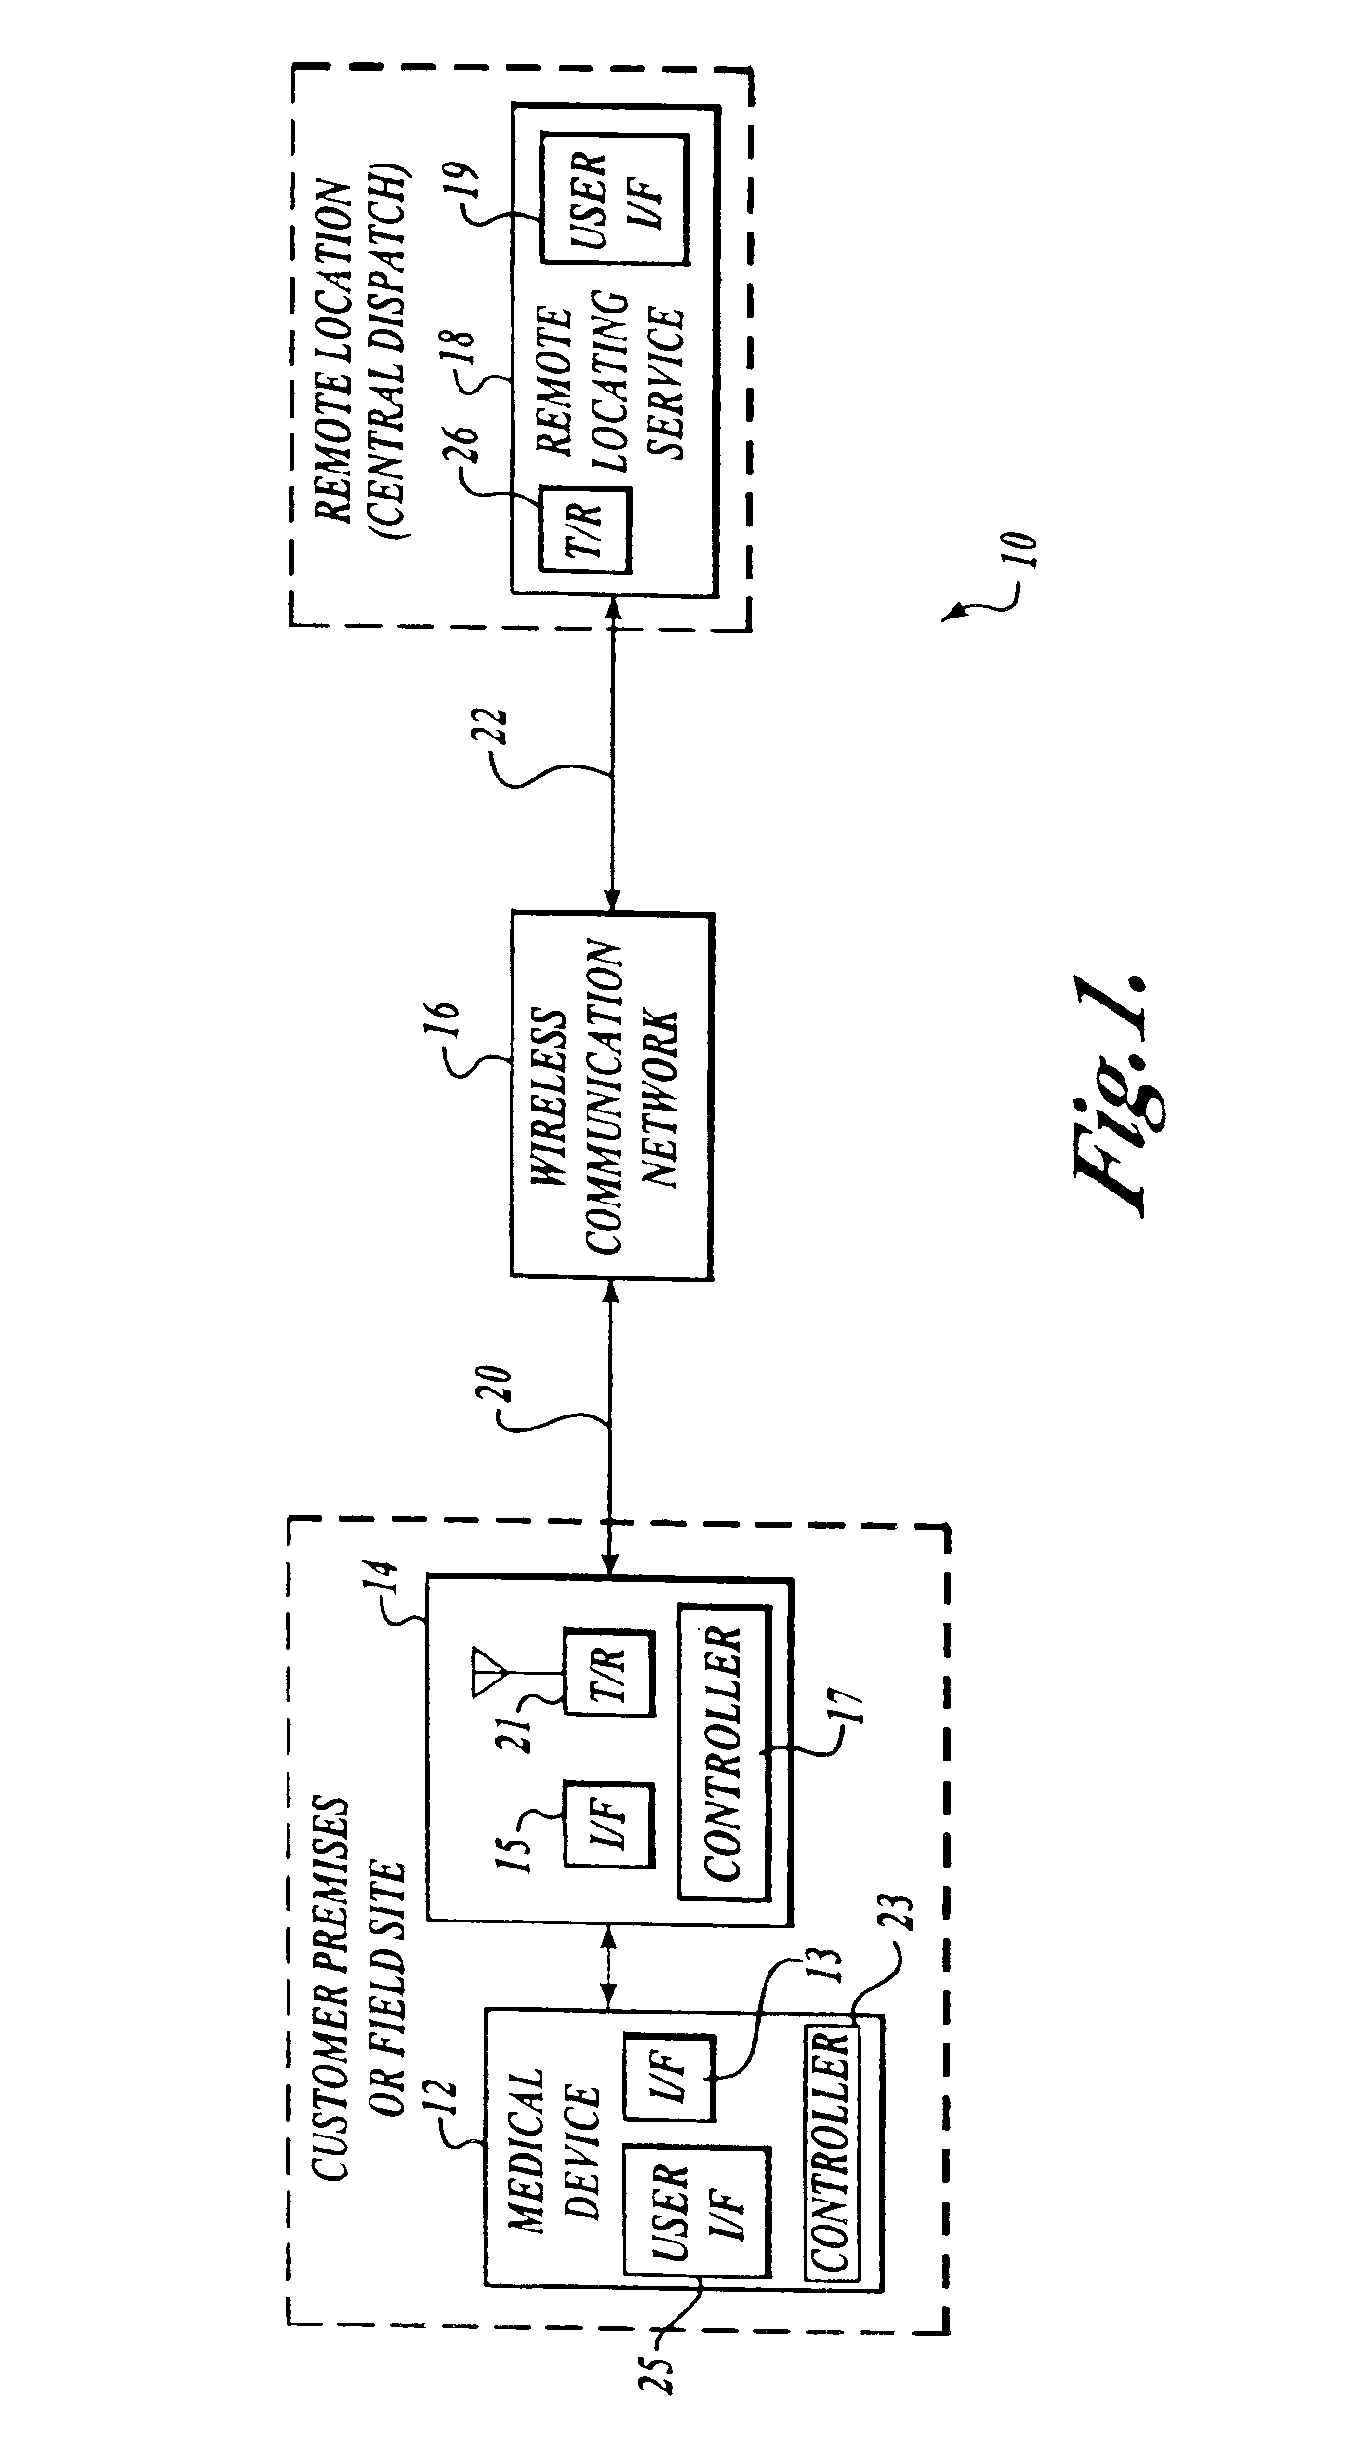 Method and system for locating a portable medical device